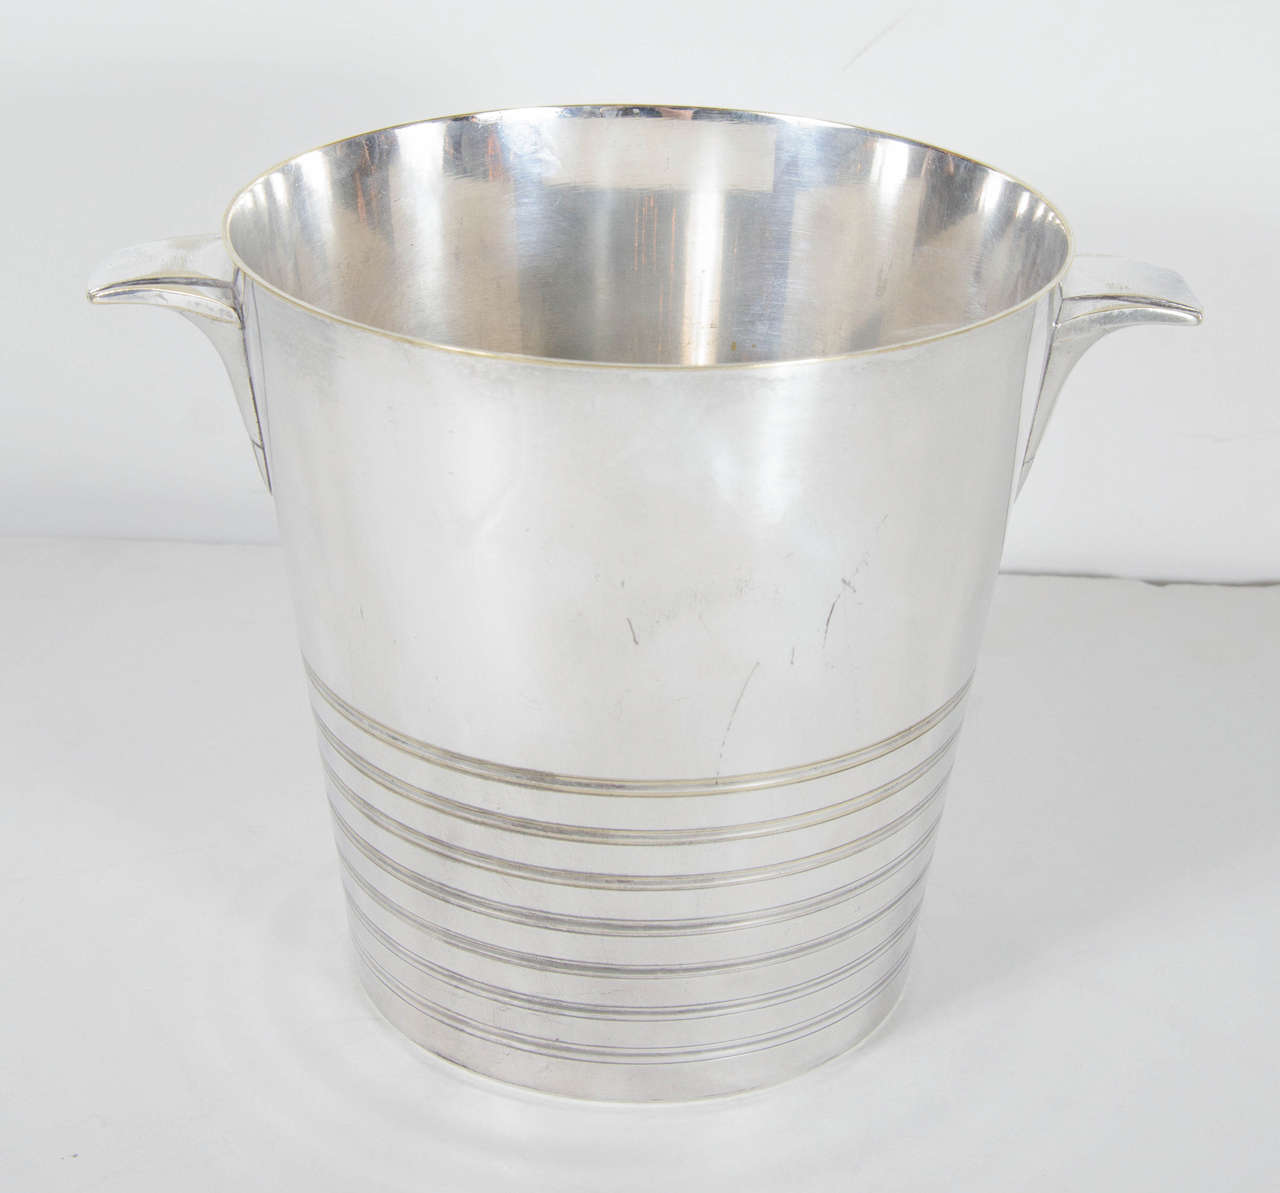 This stunning bucket features handles with a stepped Art Deco skyscraper design and concentric banded detailing. This bucket is silver-plated and bears the mark Perrin on the bottom.